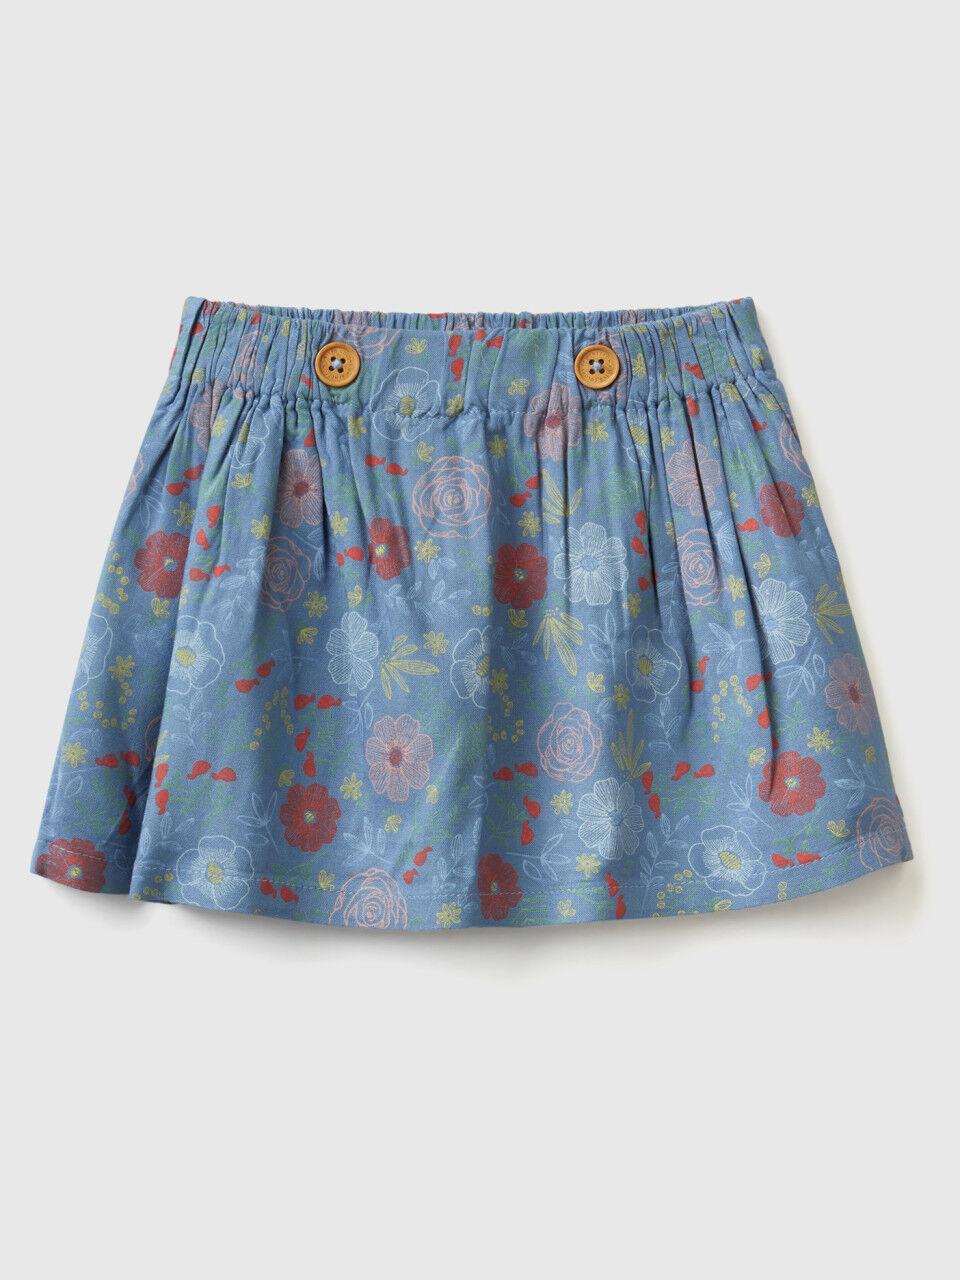 Floral skirt in sustainable viscose